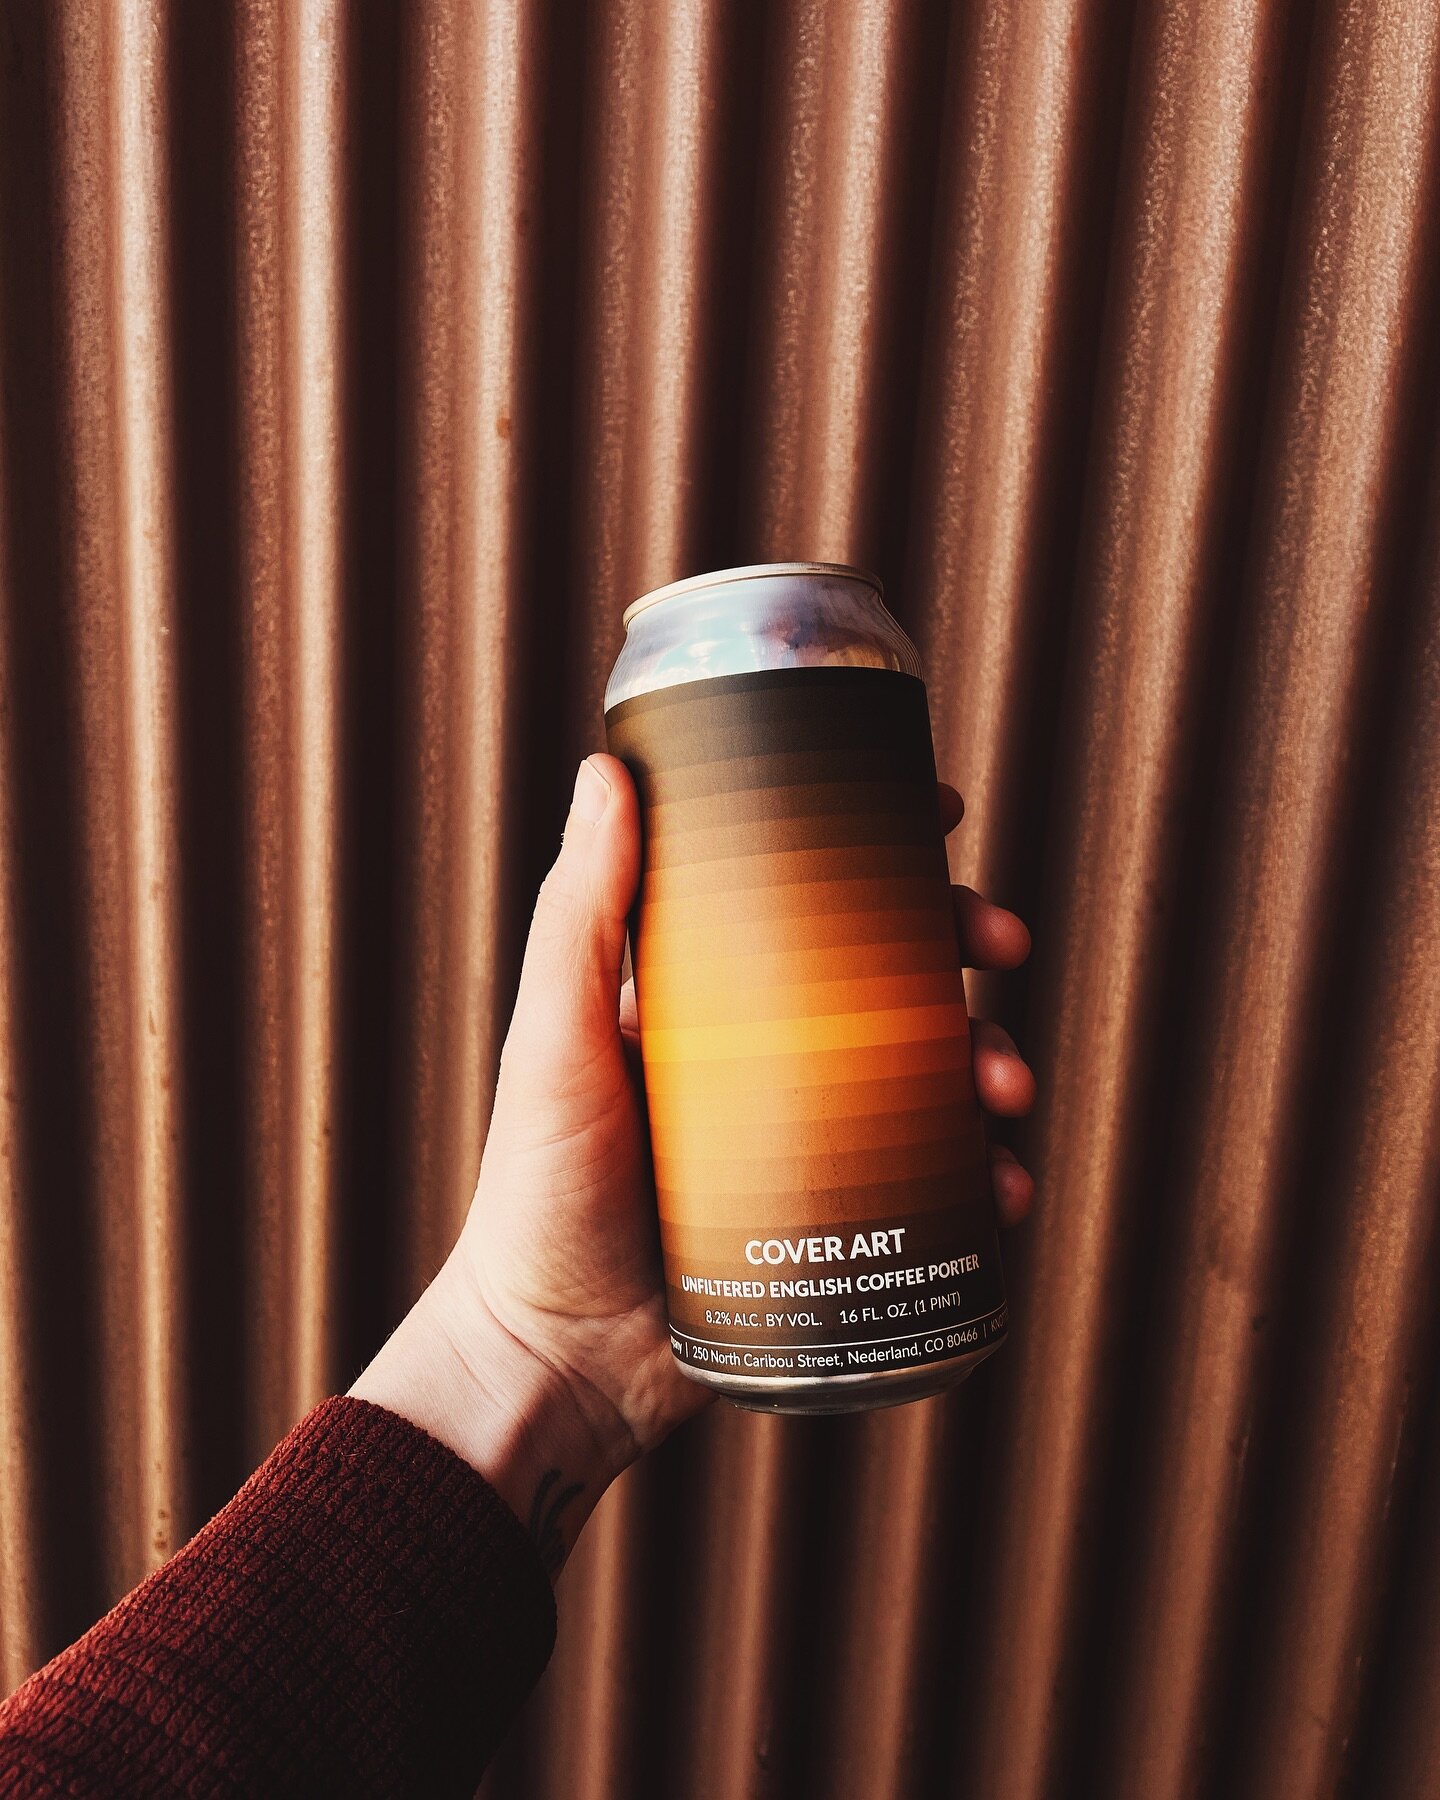 Cover art is back! This delicious unfiltered coffee porter brewed by our friends @knottedrootbrewing features coffee roasted by us! You can find cans in the cooler at the cafe now.